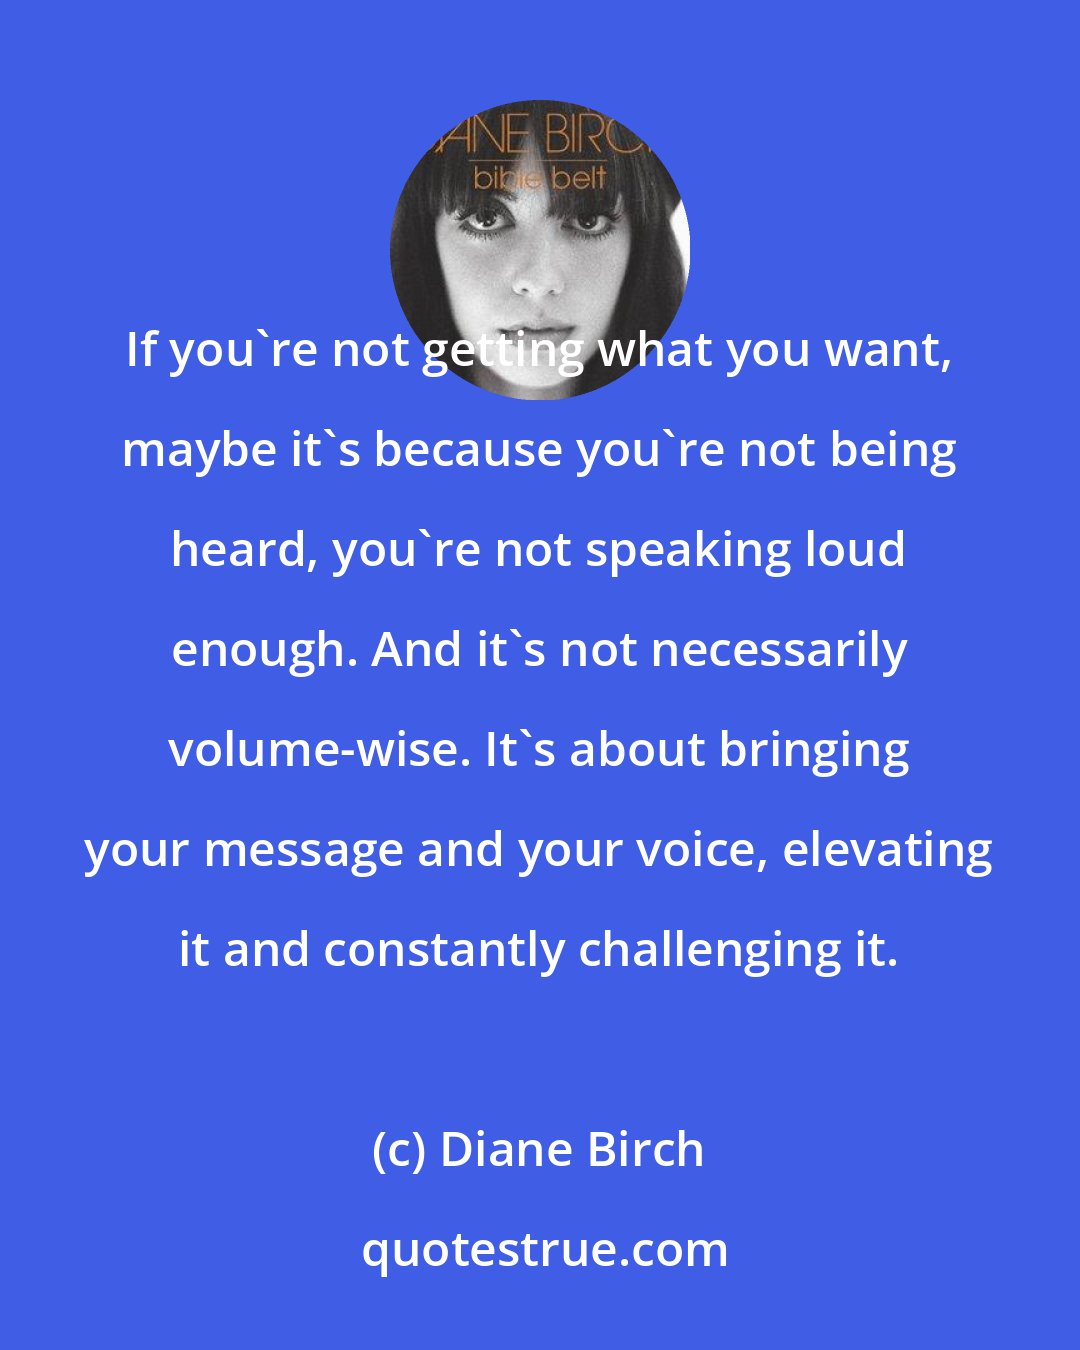 Diane Birch: If you're not getting what you want, maybe it's because you're not being heard, you're not speaking loud enough. And it's not necessarily volume-wise. It's about bringing your message and your voice, elevating it and constantly challenging it.